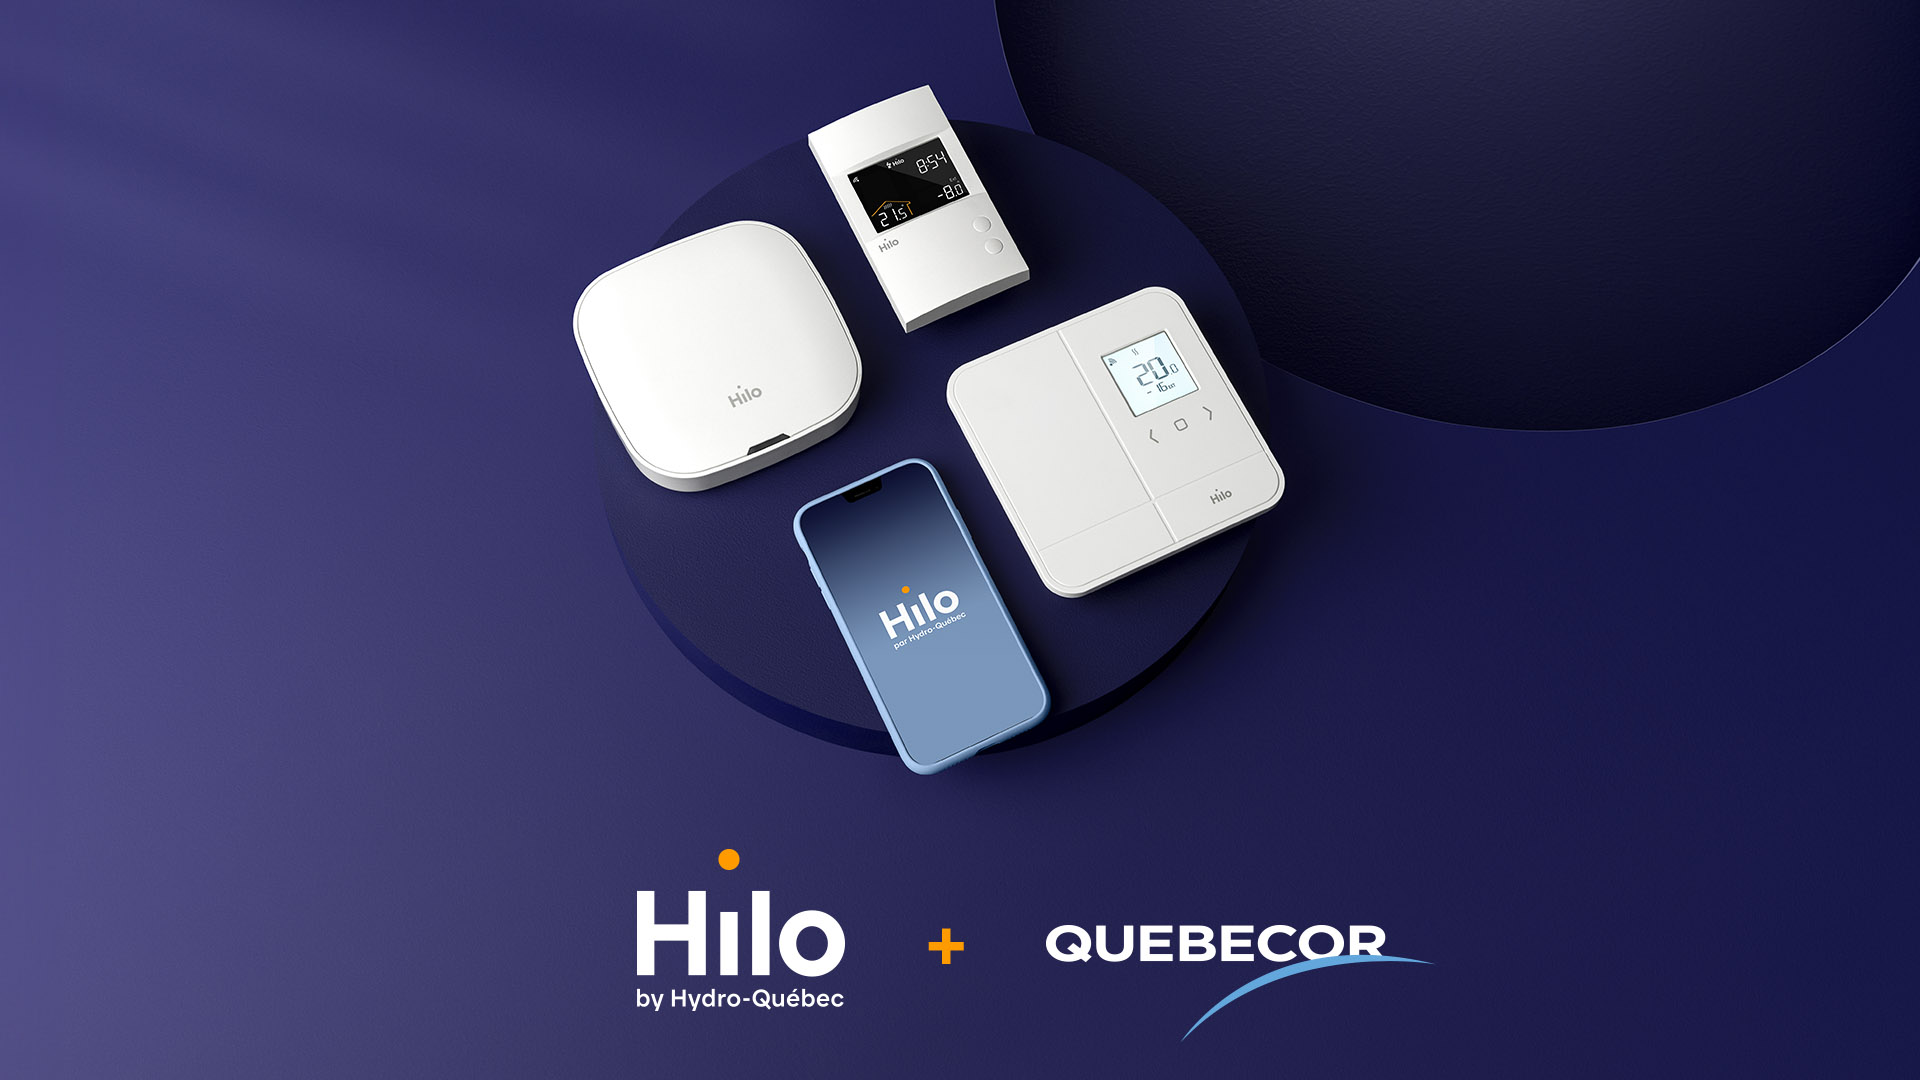 Hilo and Quebecor: A partnership for better energy consumption